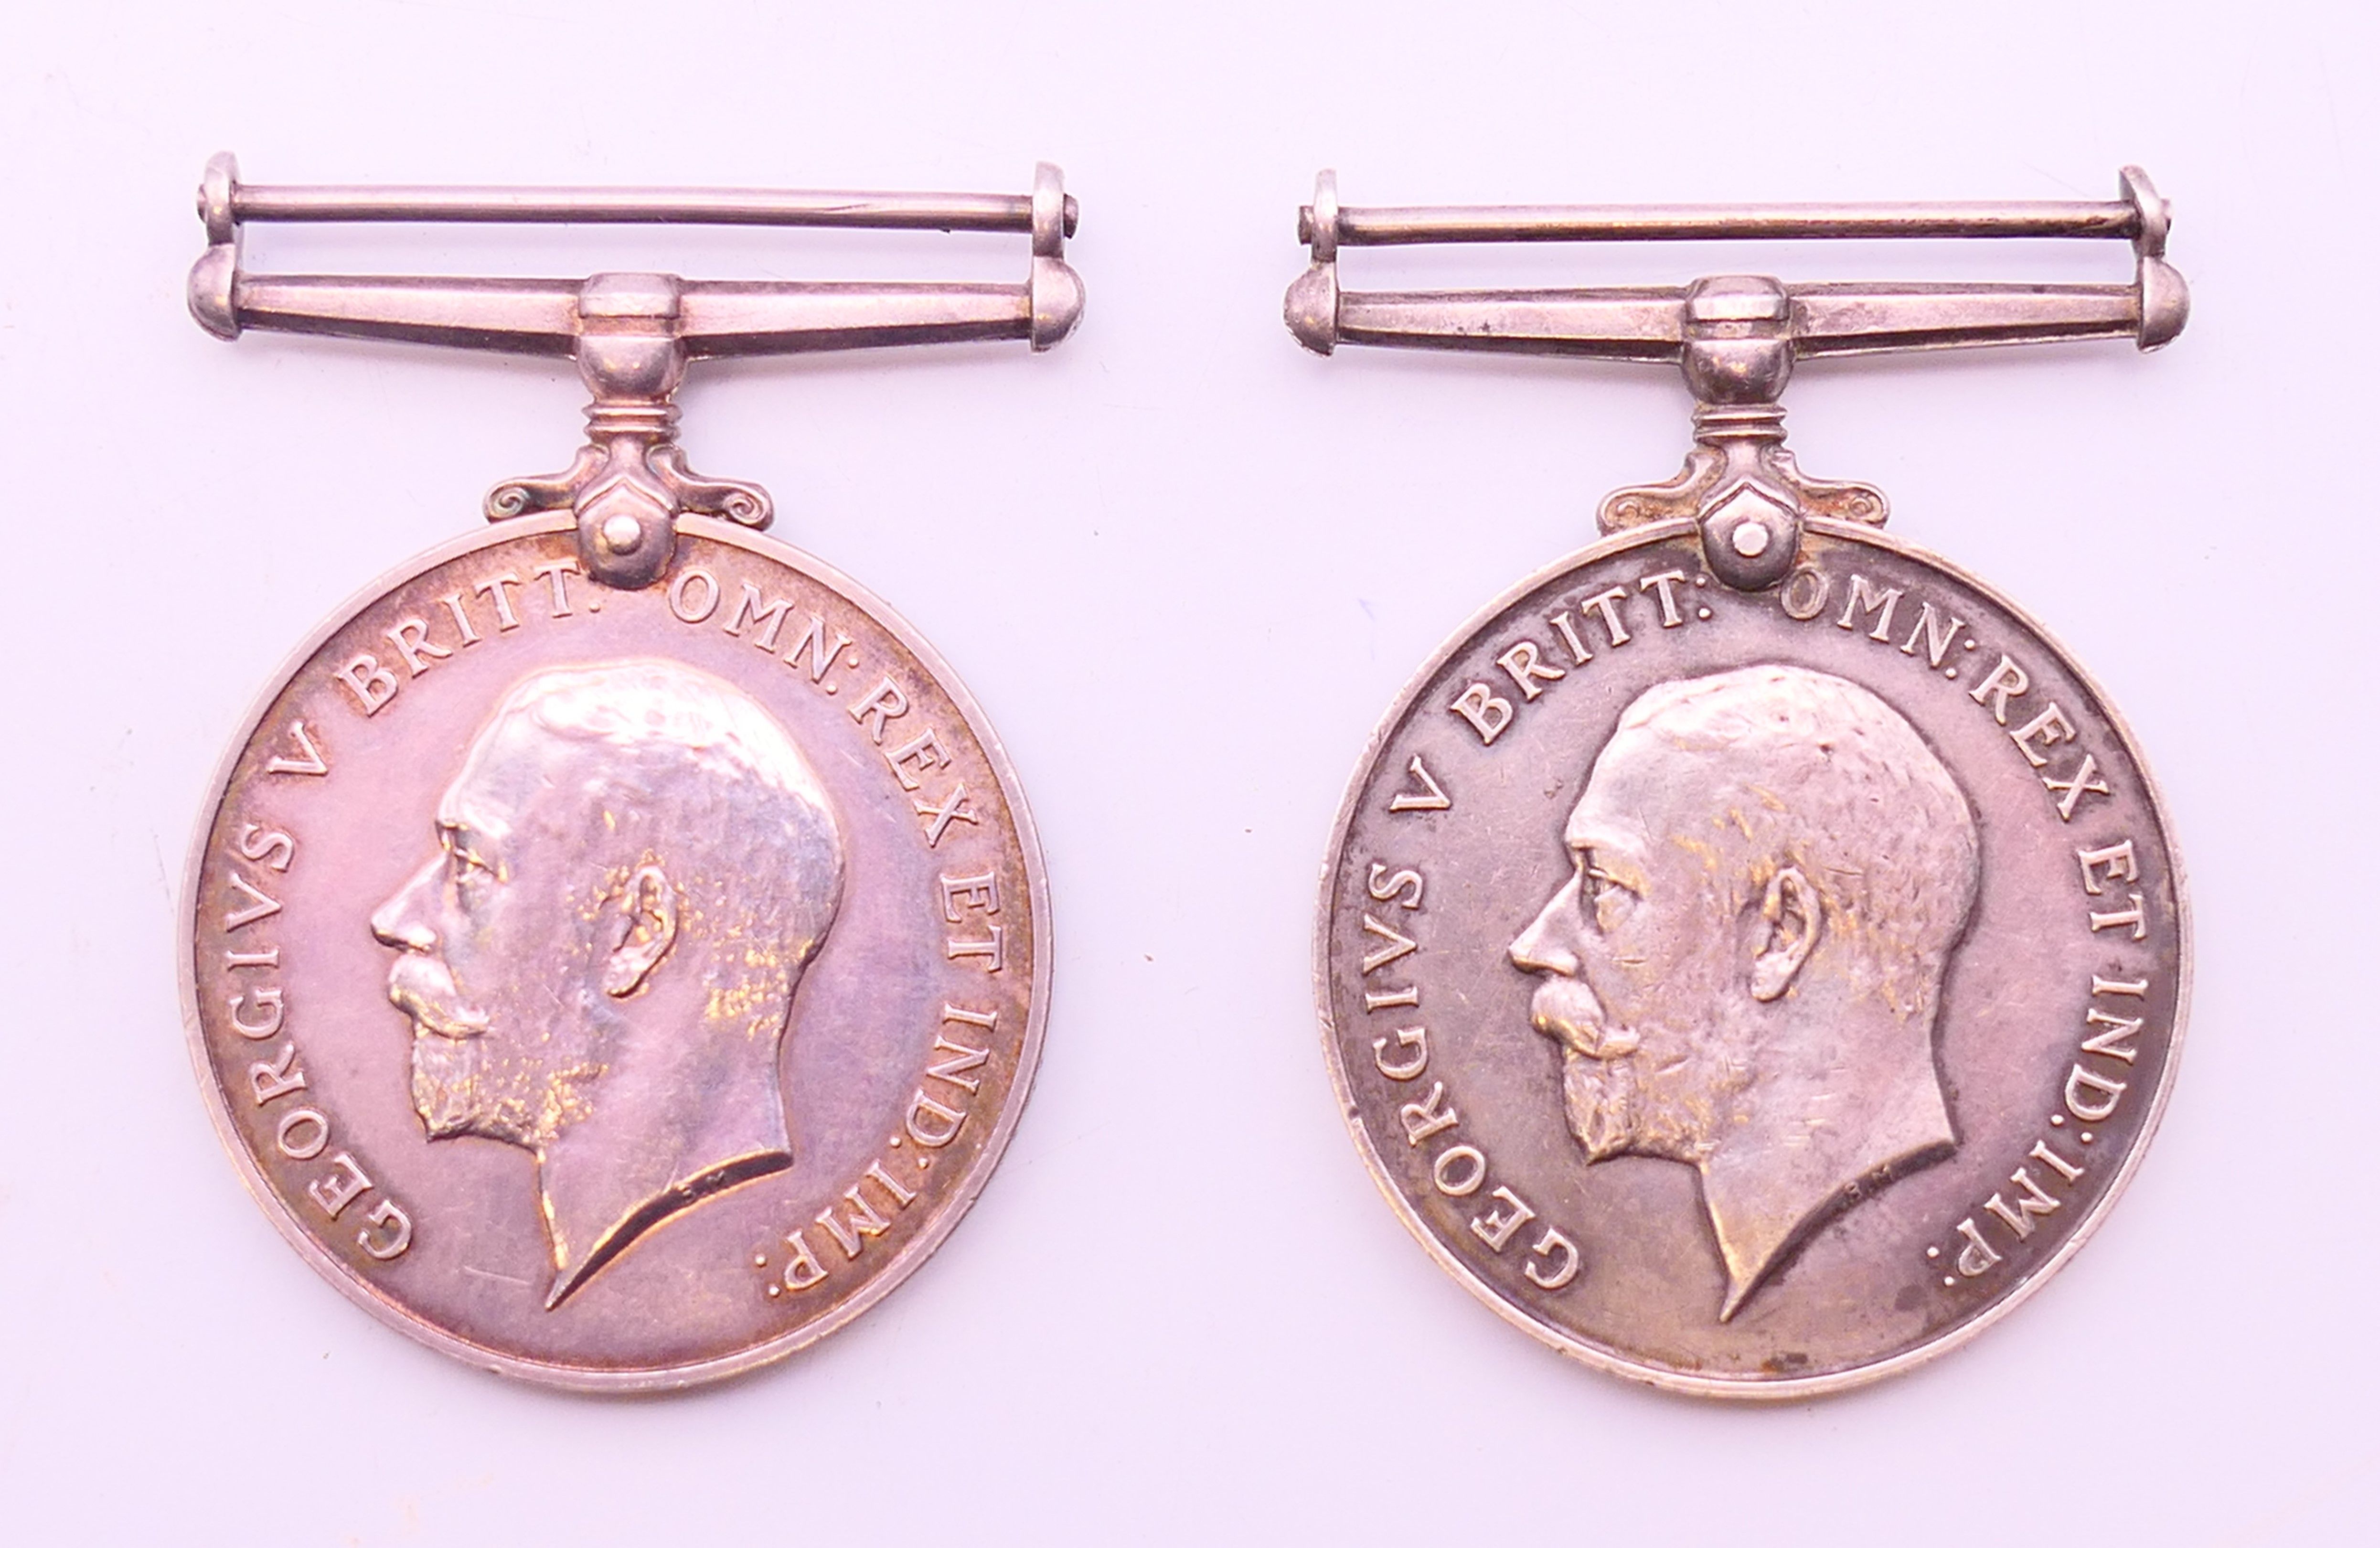 Two WWI British War 1914-1918 medals awarded to 3709 PTE S WESTLEY CAMB R. - Image 2 of 4